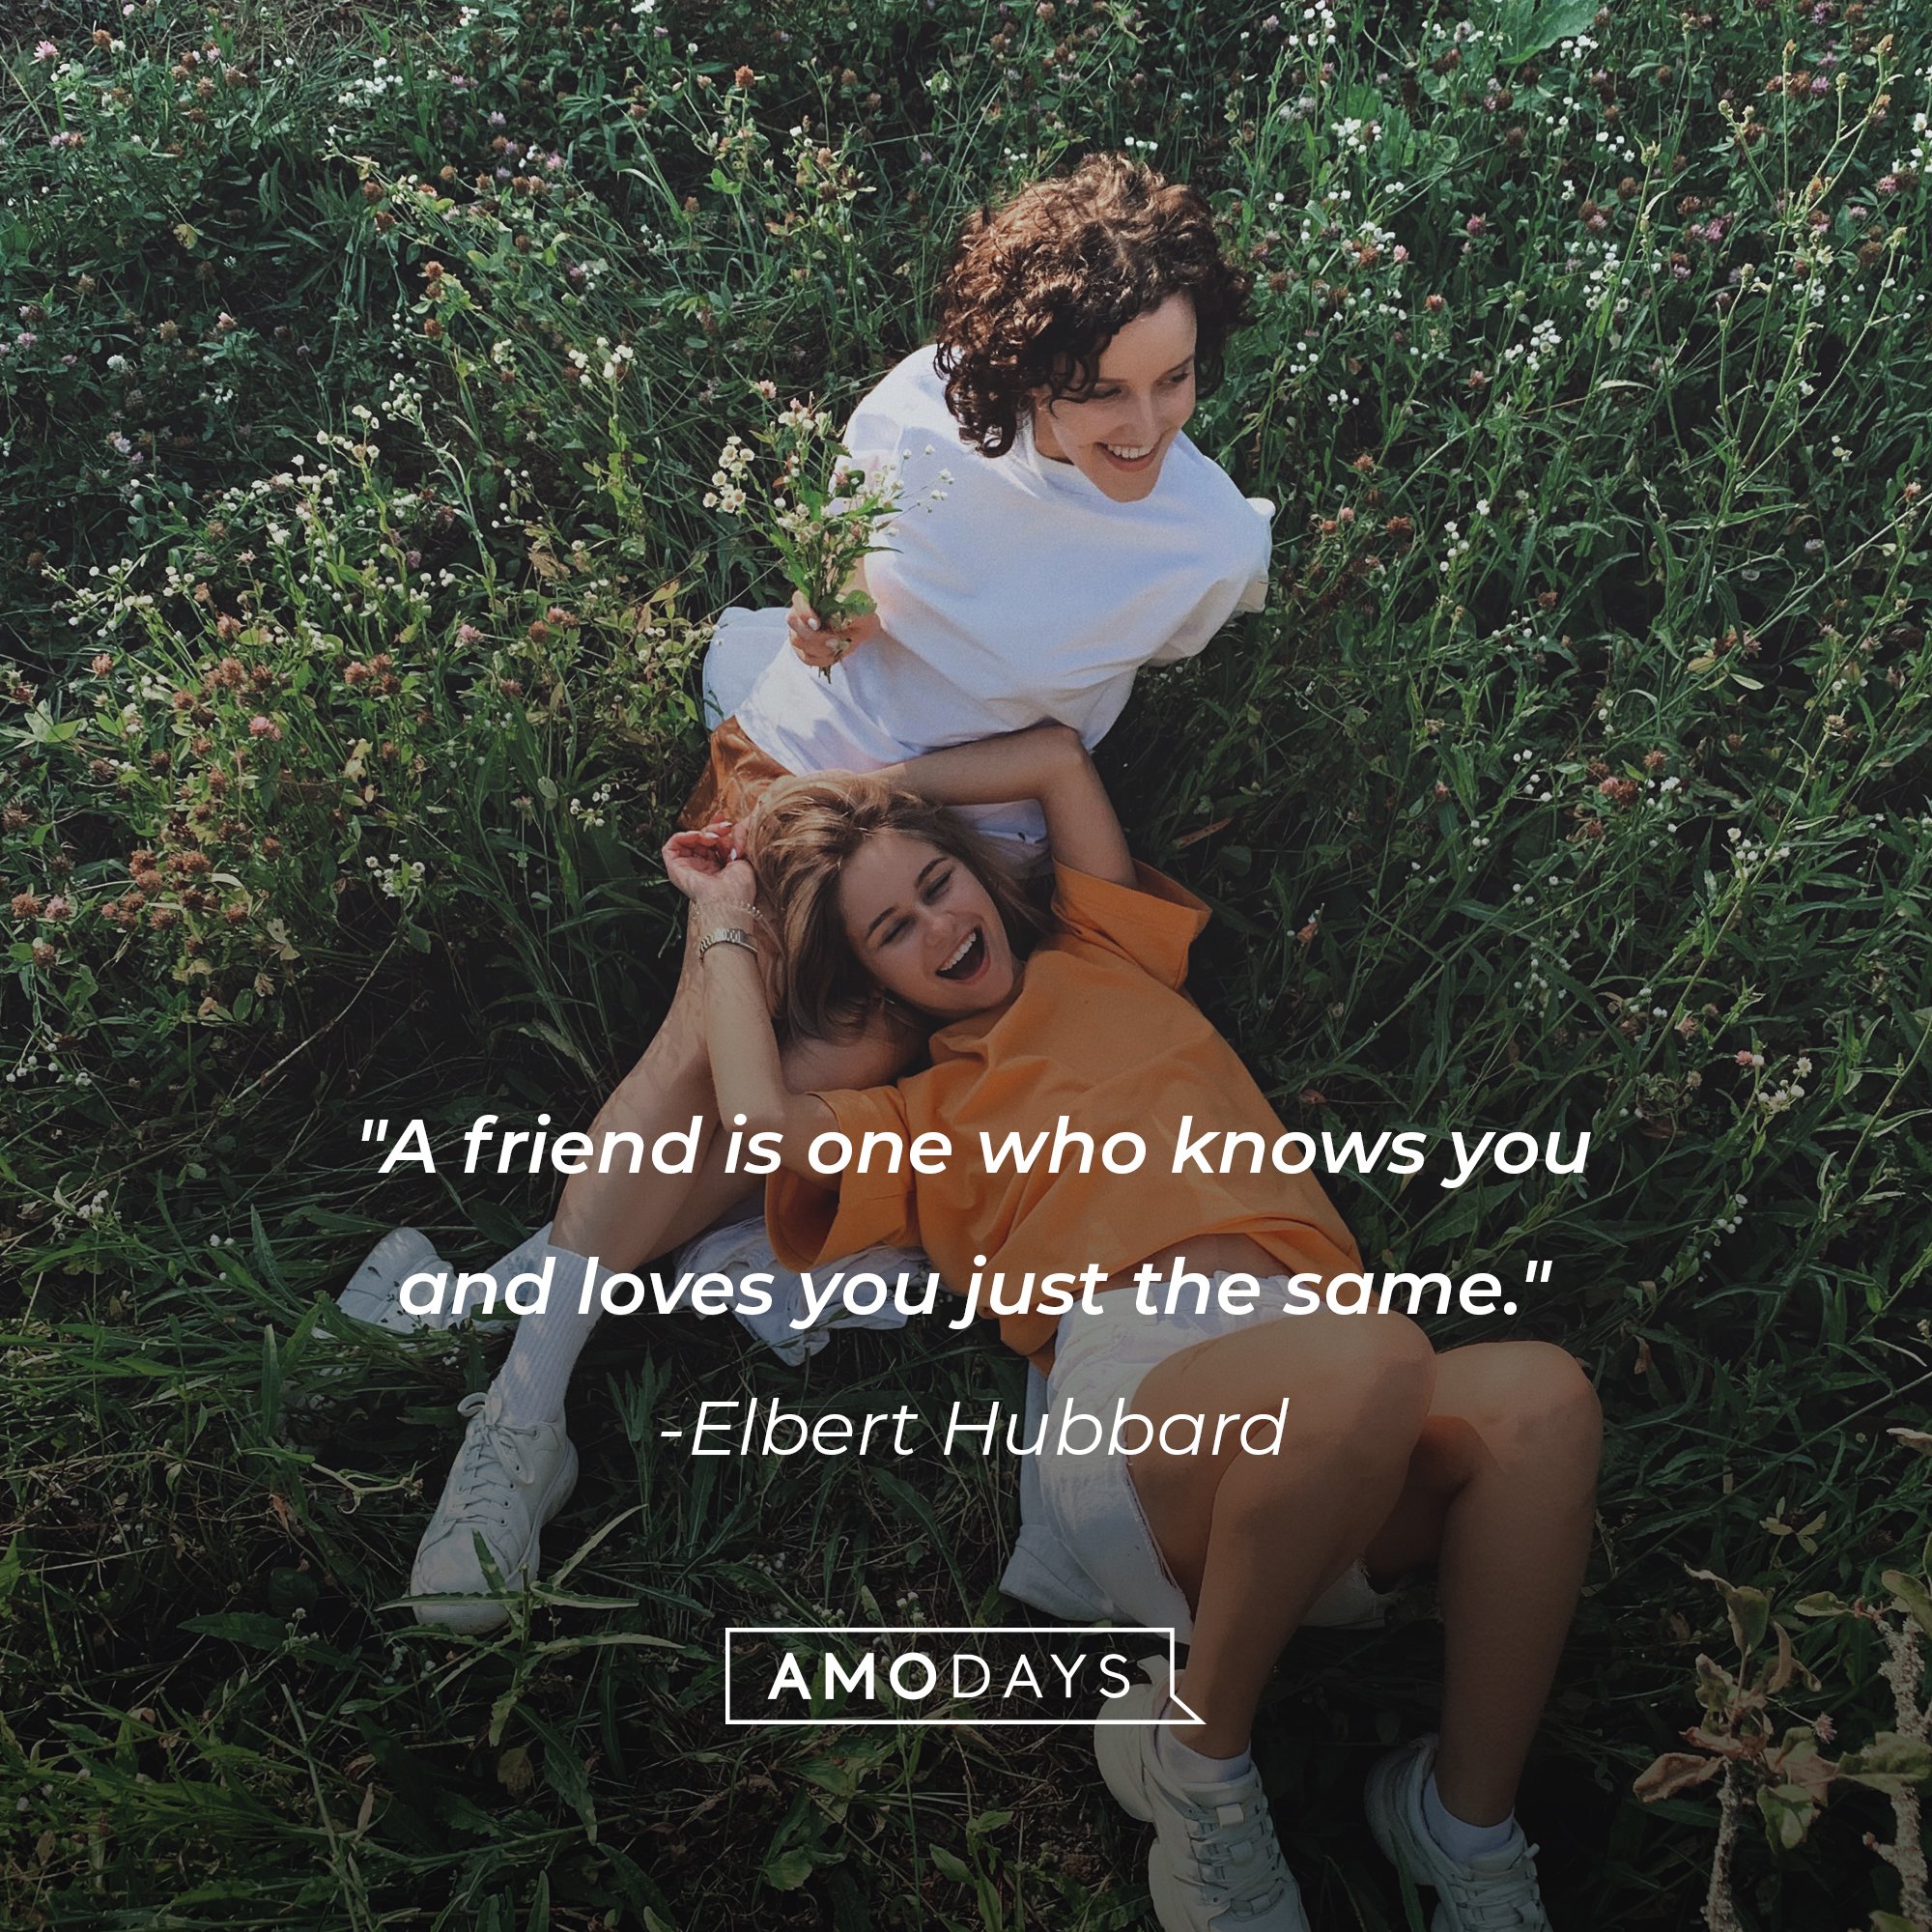 Elbert Hubbard’s quote: "A friend is one who knows you and loves you just the same." | Image: AmoDays 